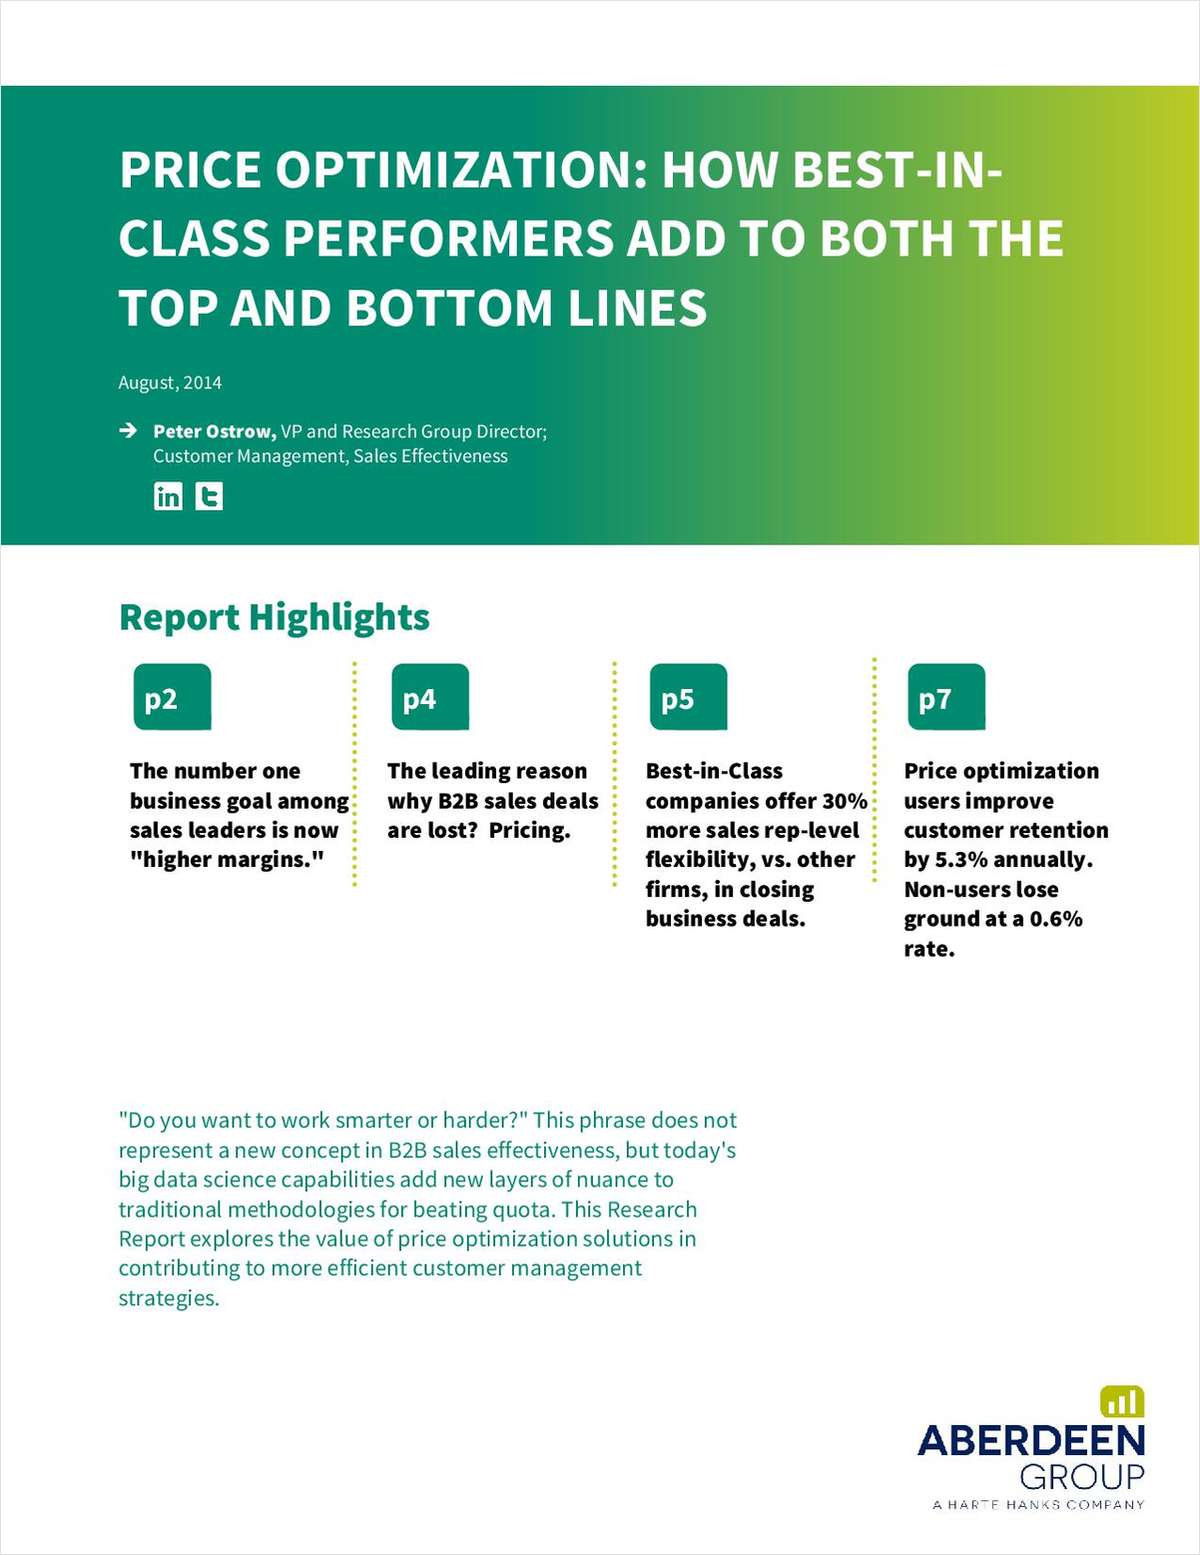 Pricing Optimization Best Practices in Best-in-Class Companies Revealed